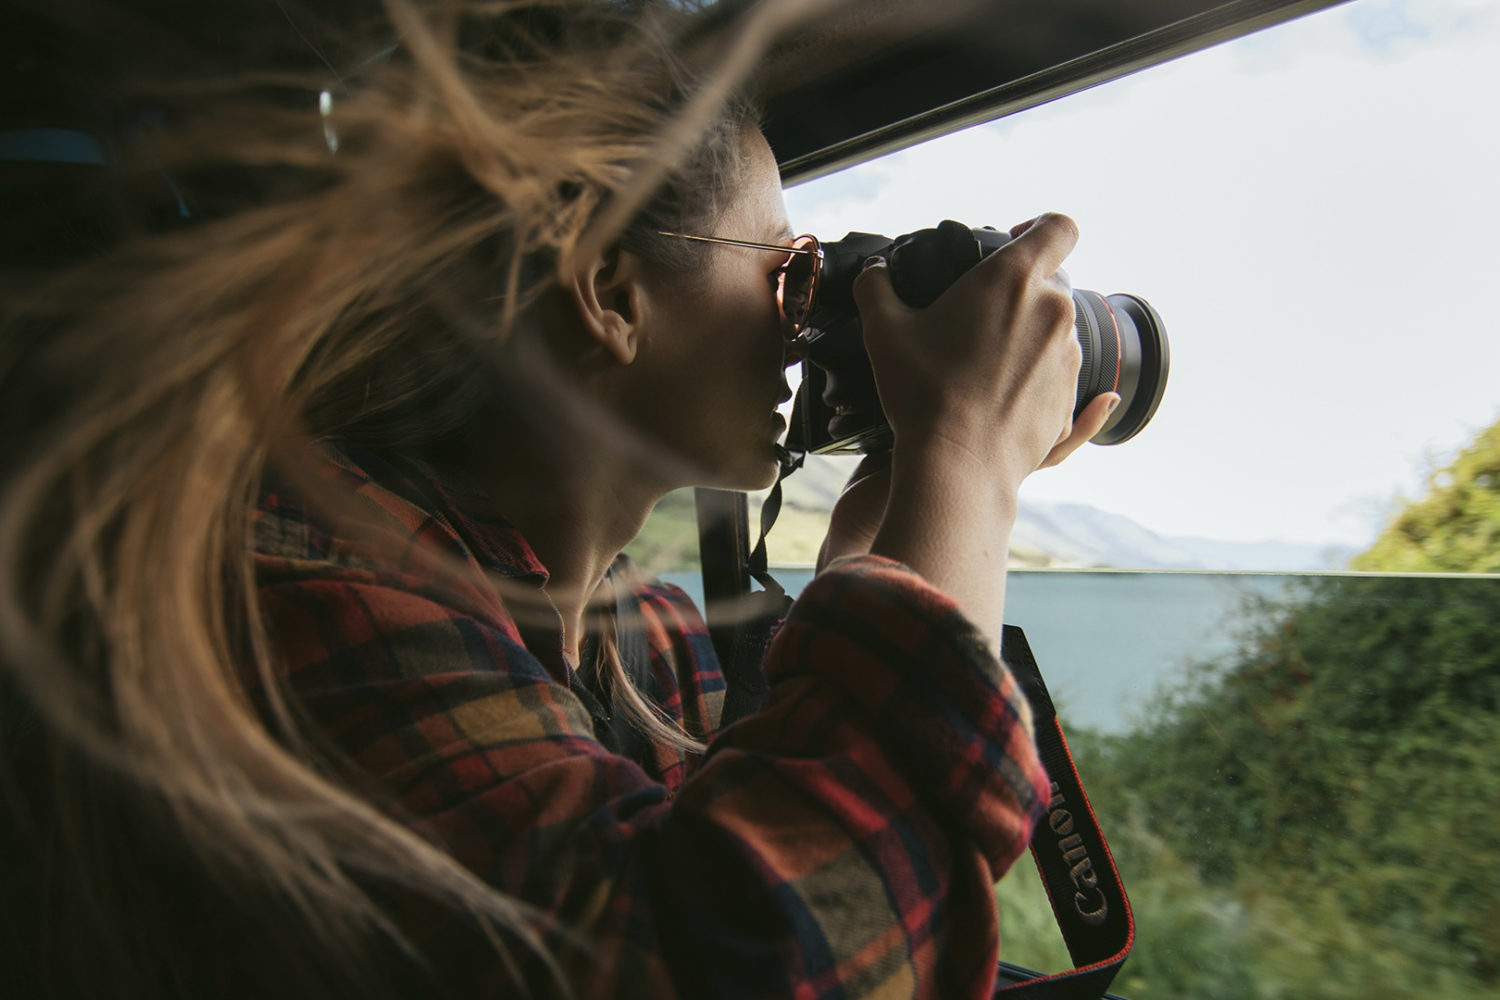 How to become a successful freelance photographer